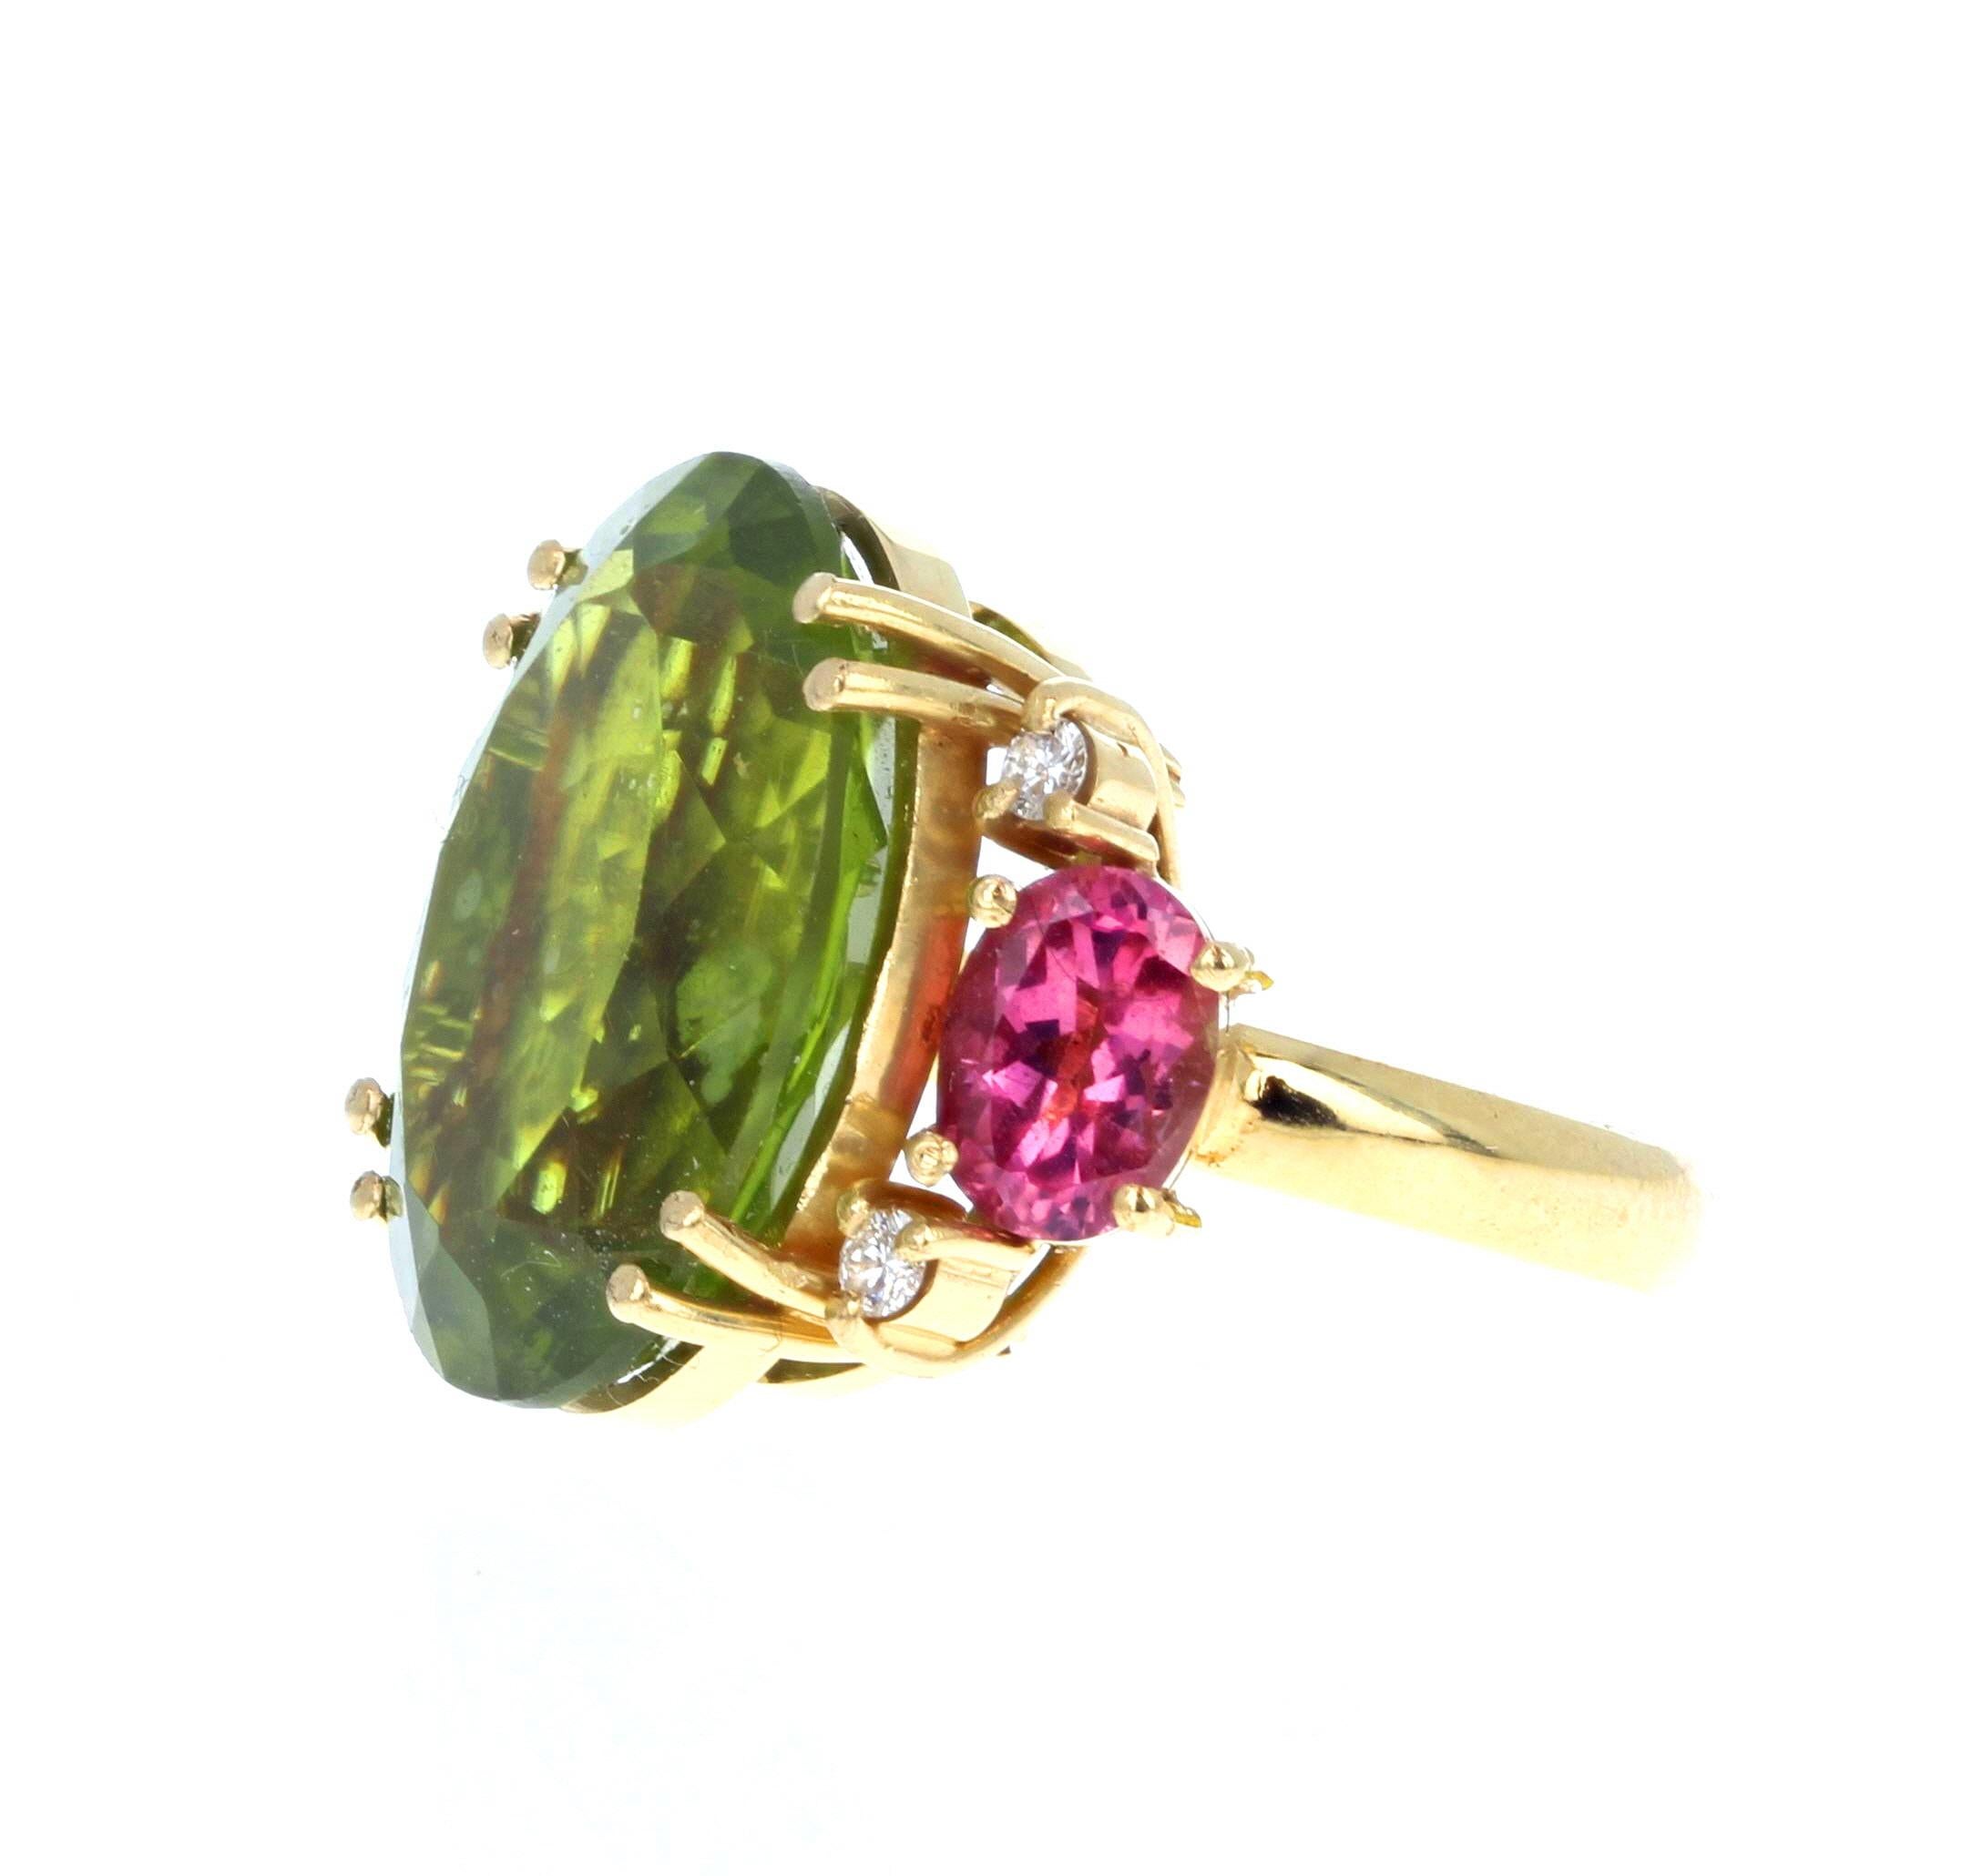 Mixed Cut AJD Magnificent Brilliant 14 Ct Green&Pink Tourmalines, Diamonds 18Kt Gold Ring For Sale